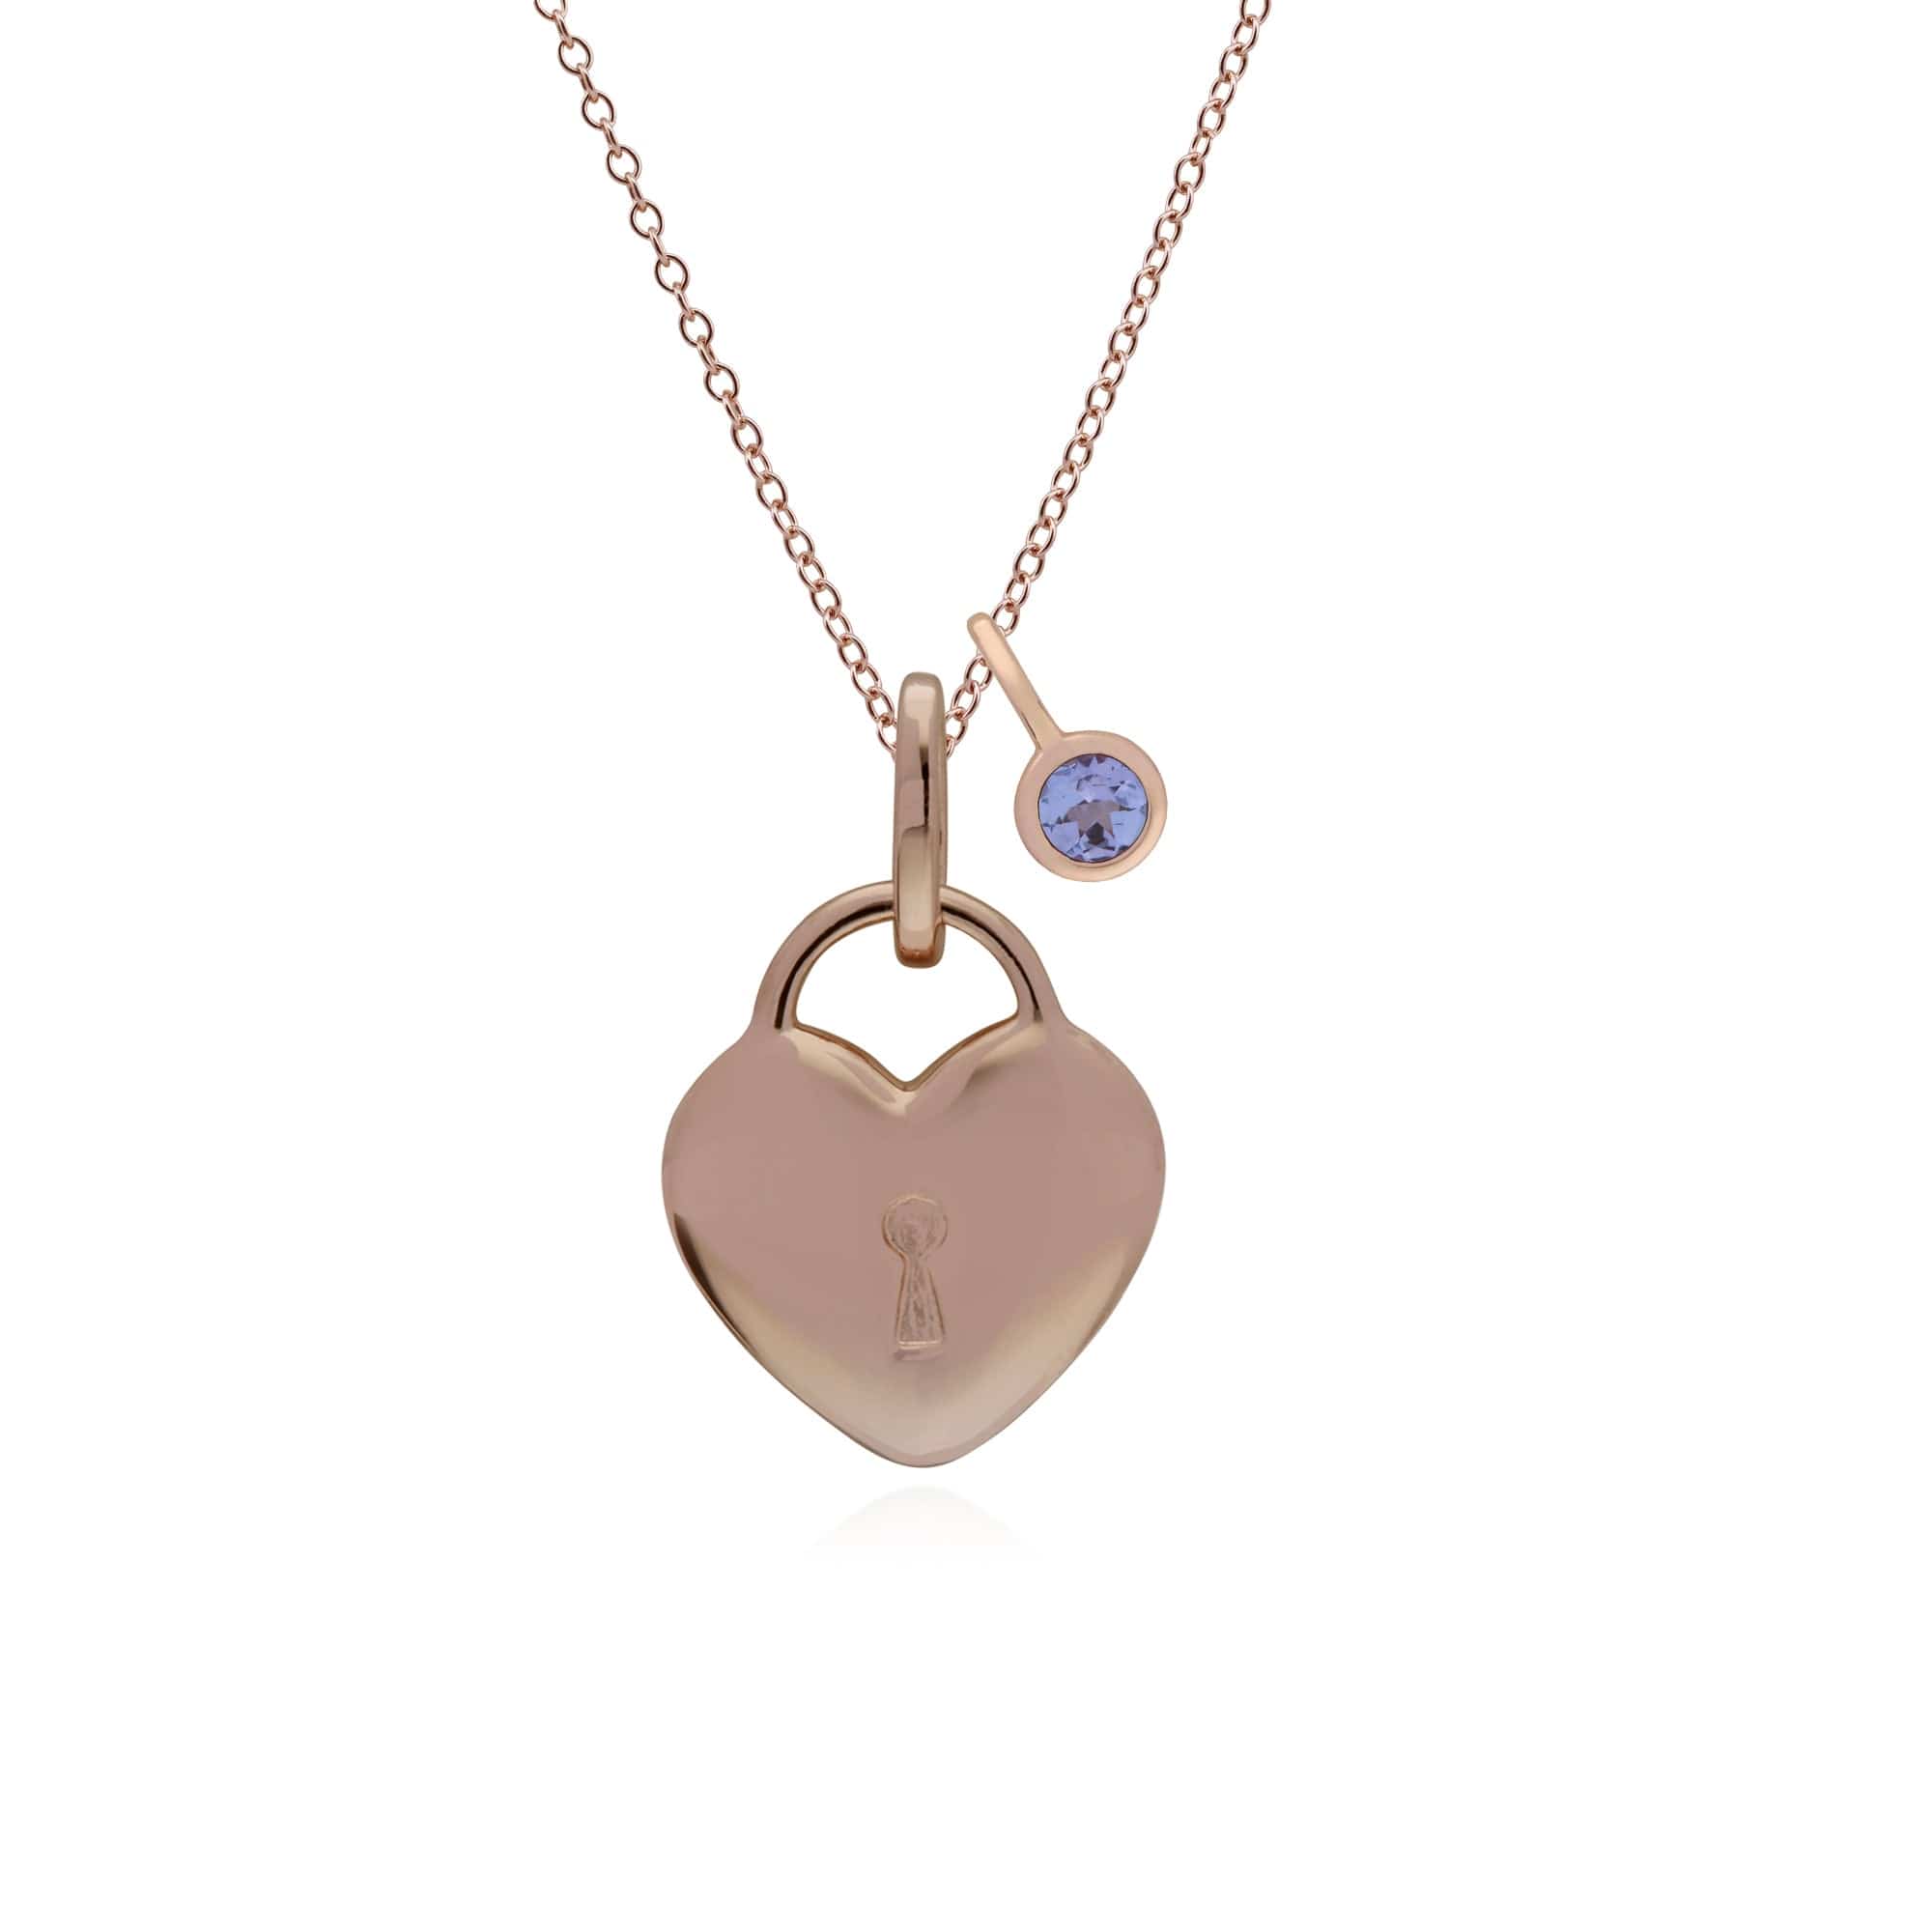 270P027306925-270P026901925 Classic Heart Lock Pendant & Tanzanite Charm in Rose Gold Plated 925 Sterling Silver 1